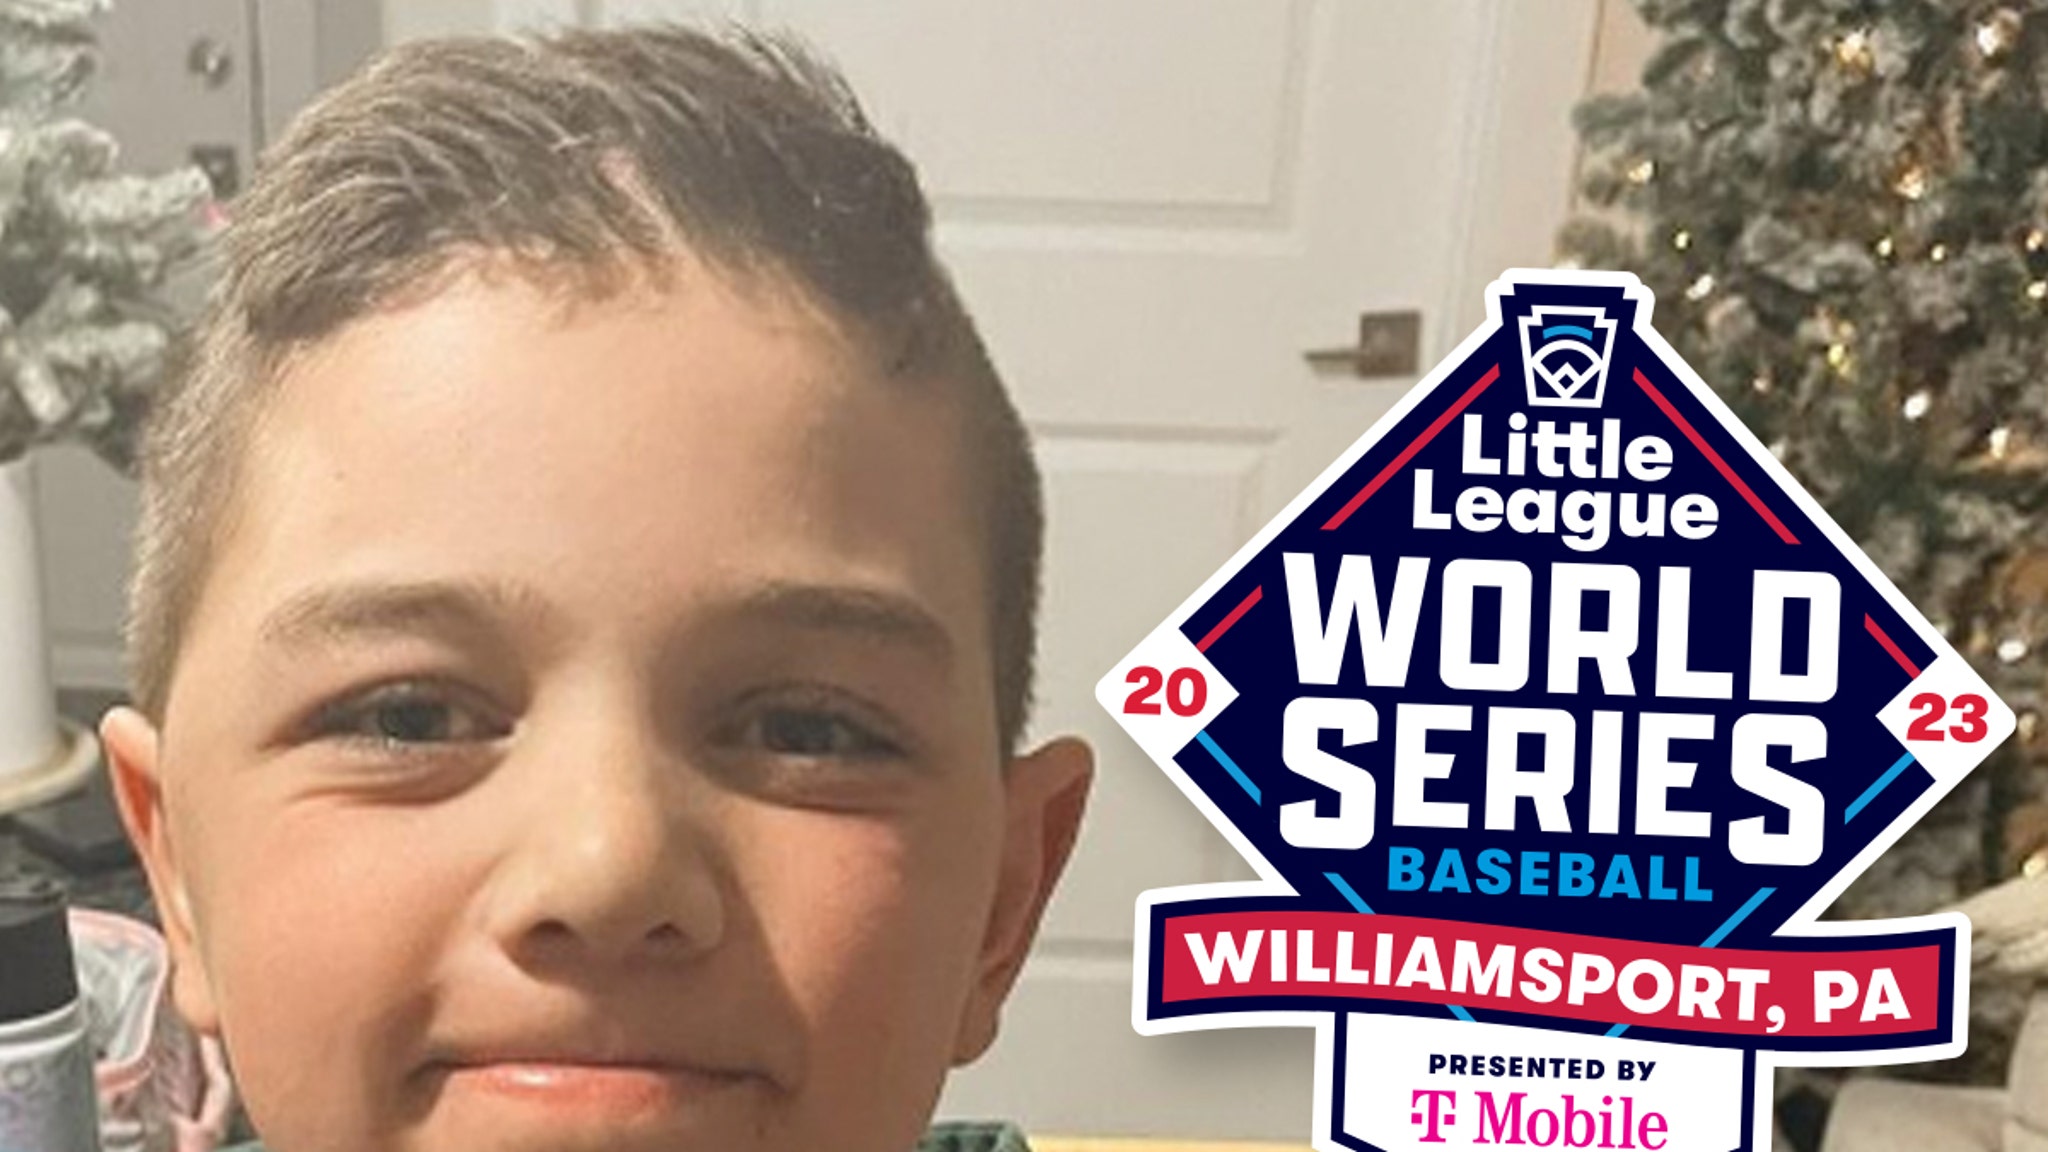 Little League World Series Permanently Removing Bunk Beds After Player’s Injury